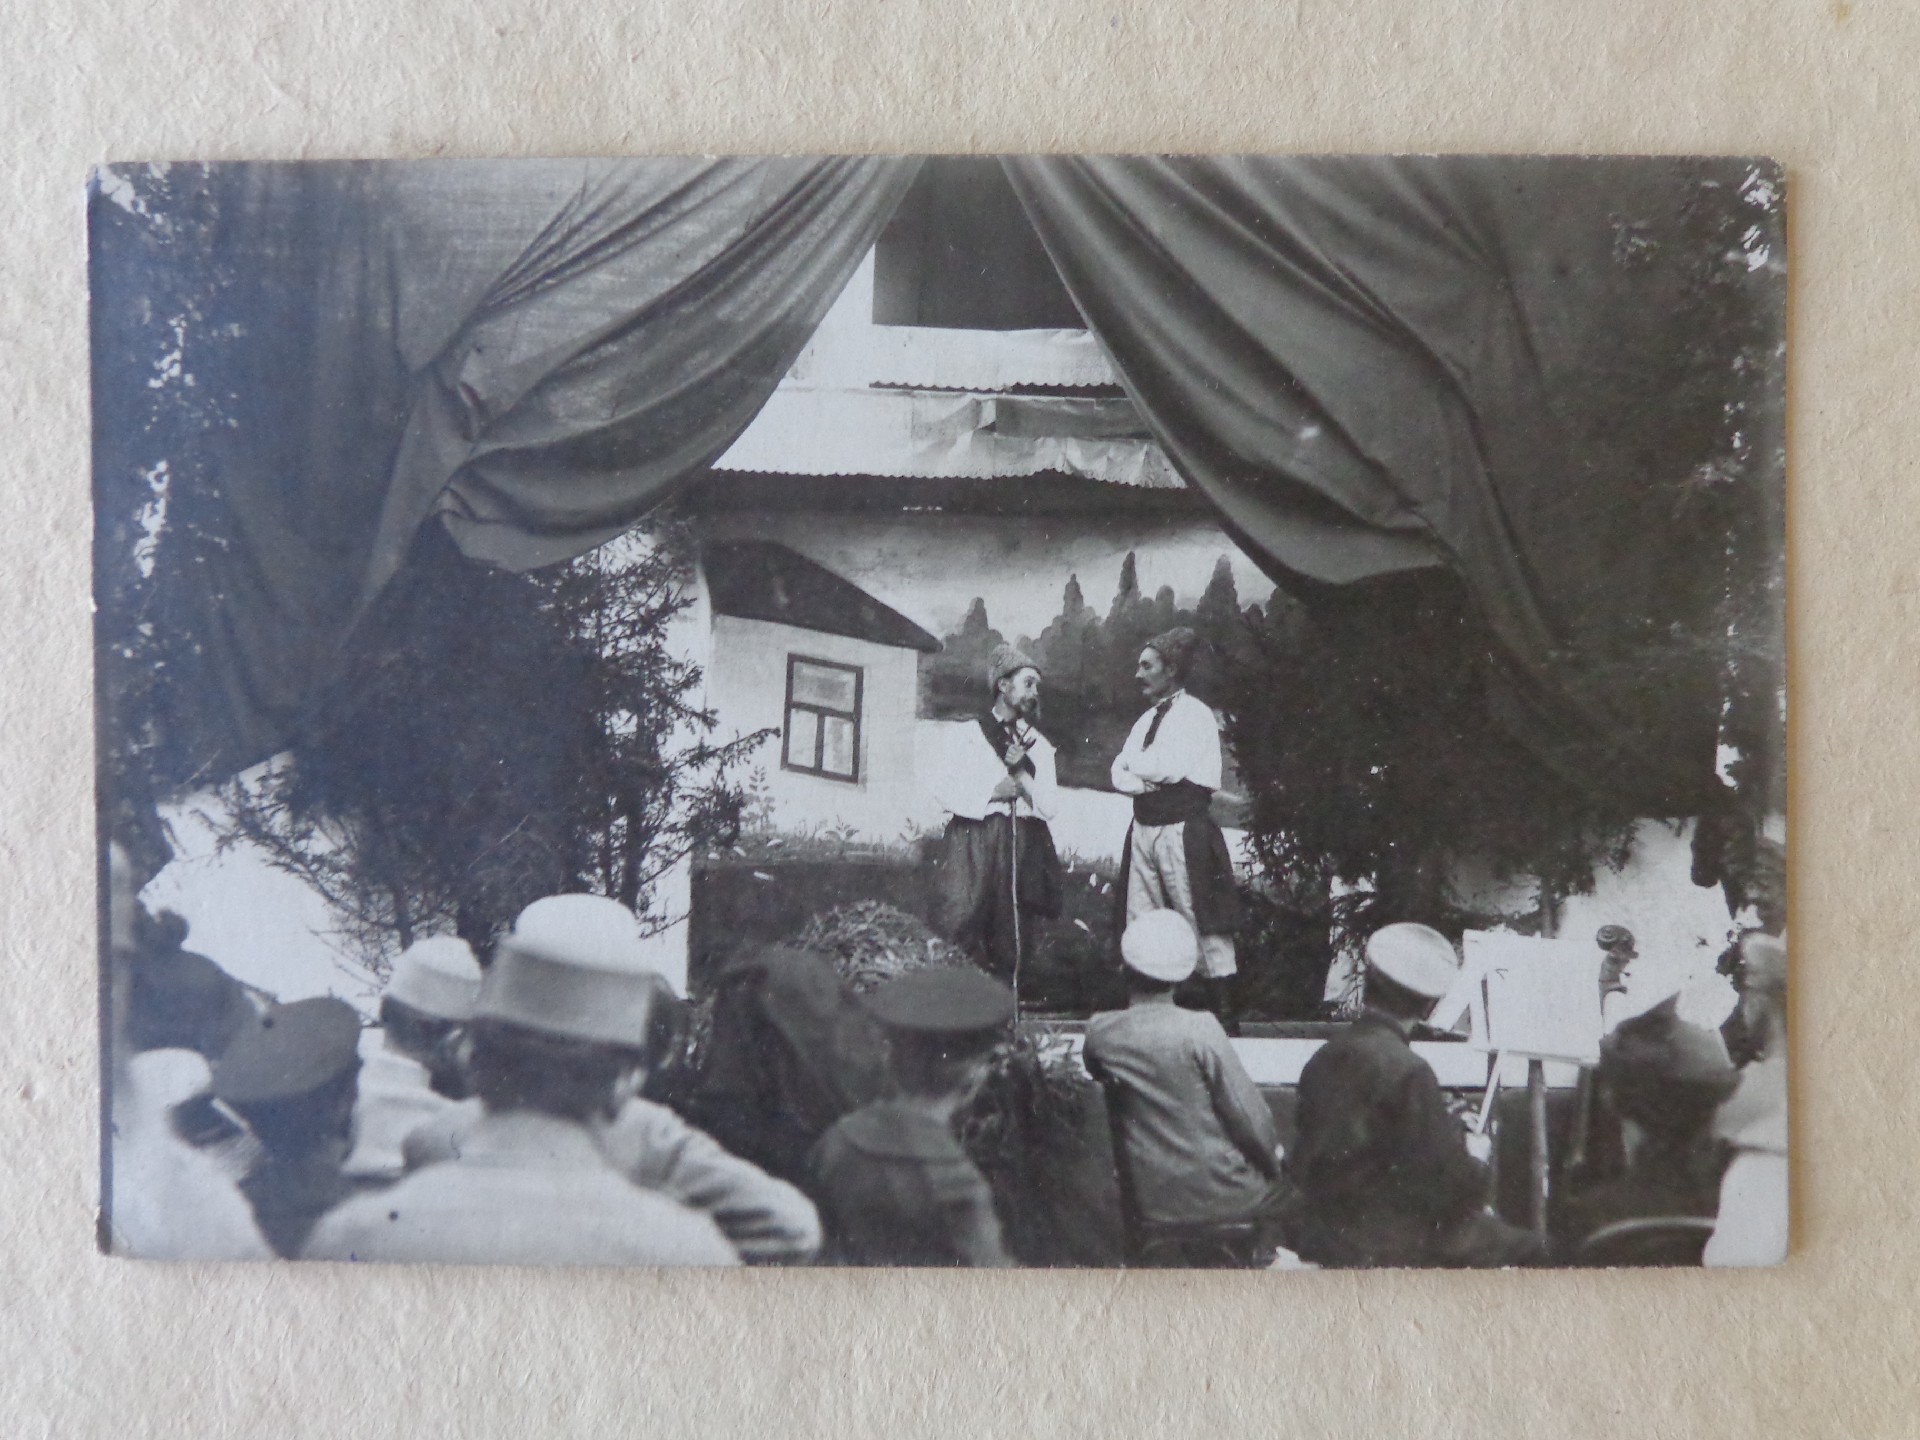 Staging Culture at War: Theatre, Entertainment, and Artists’ Networks in Lemberg/Lwów/Lviv (1914—1923?)